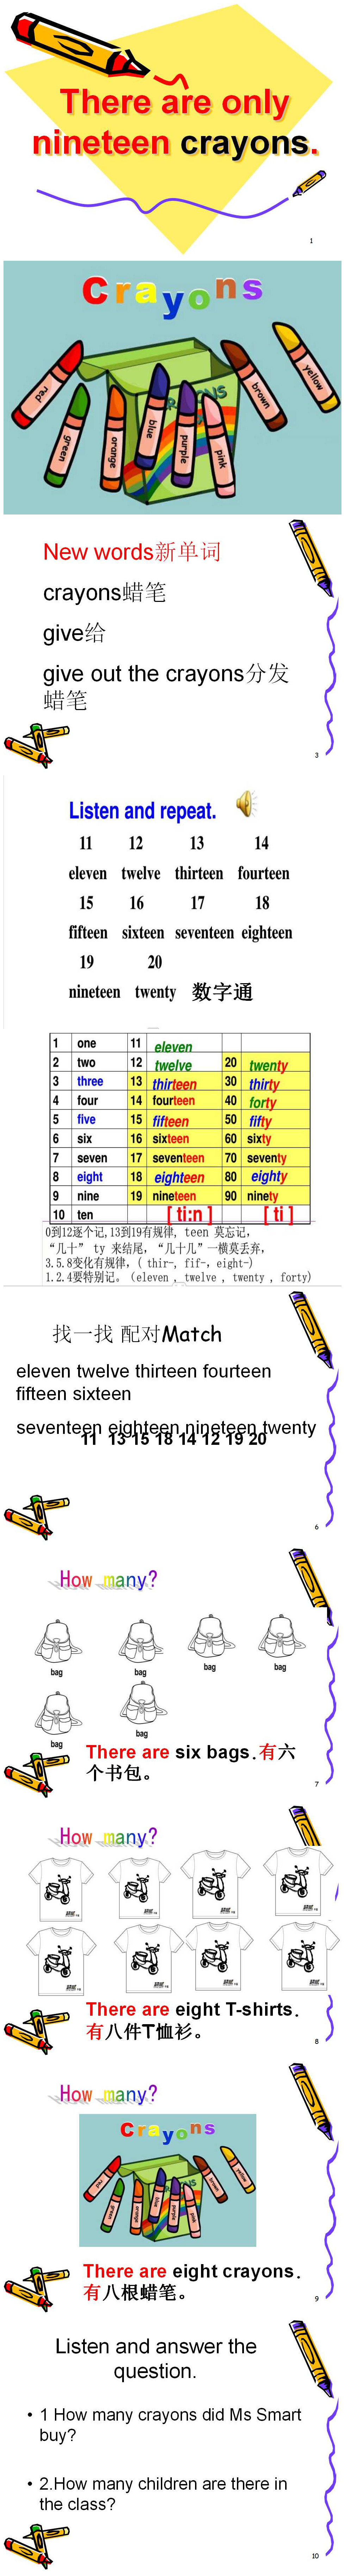 《There are only nineteen crayons》PPT课件2PPT课件下载